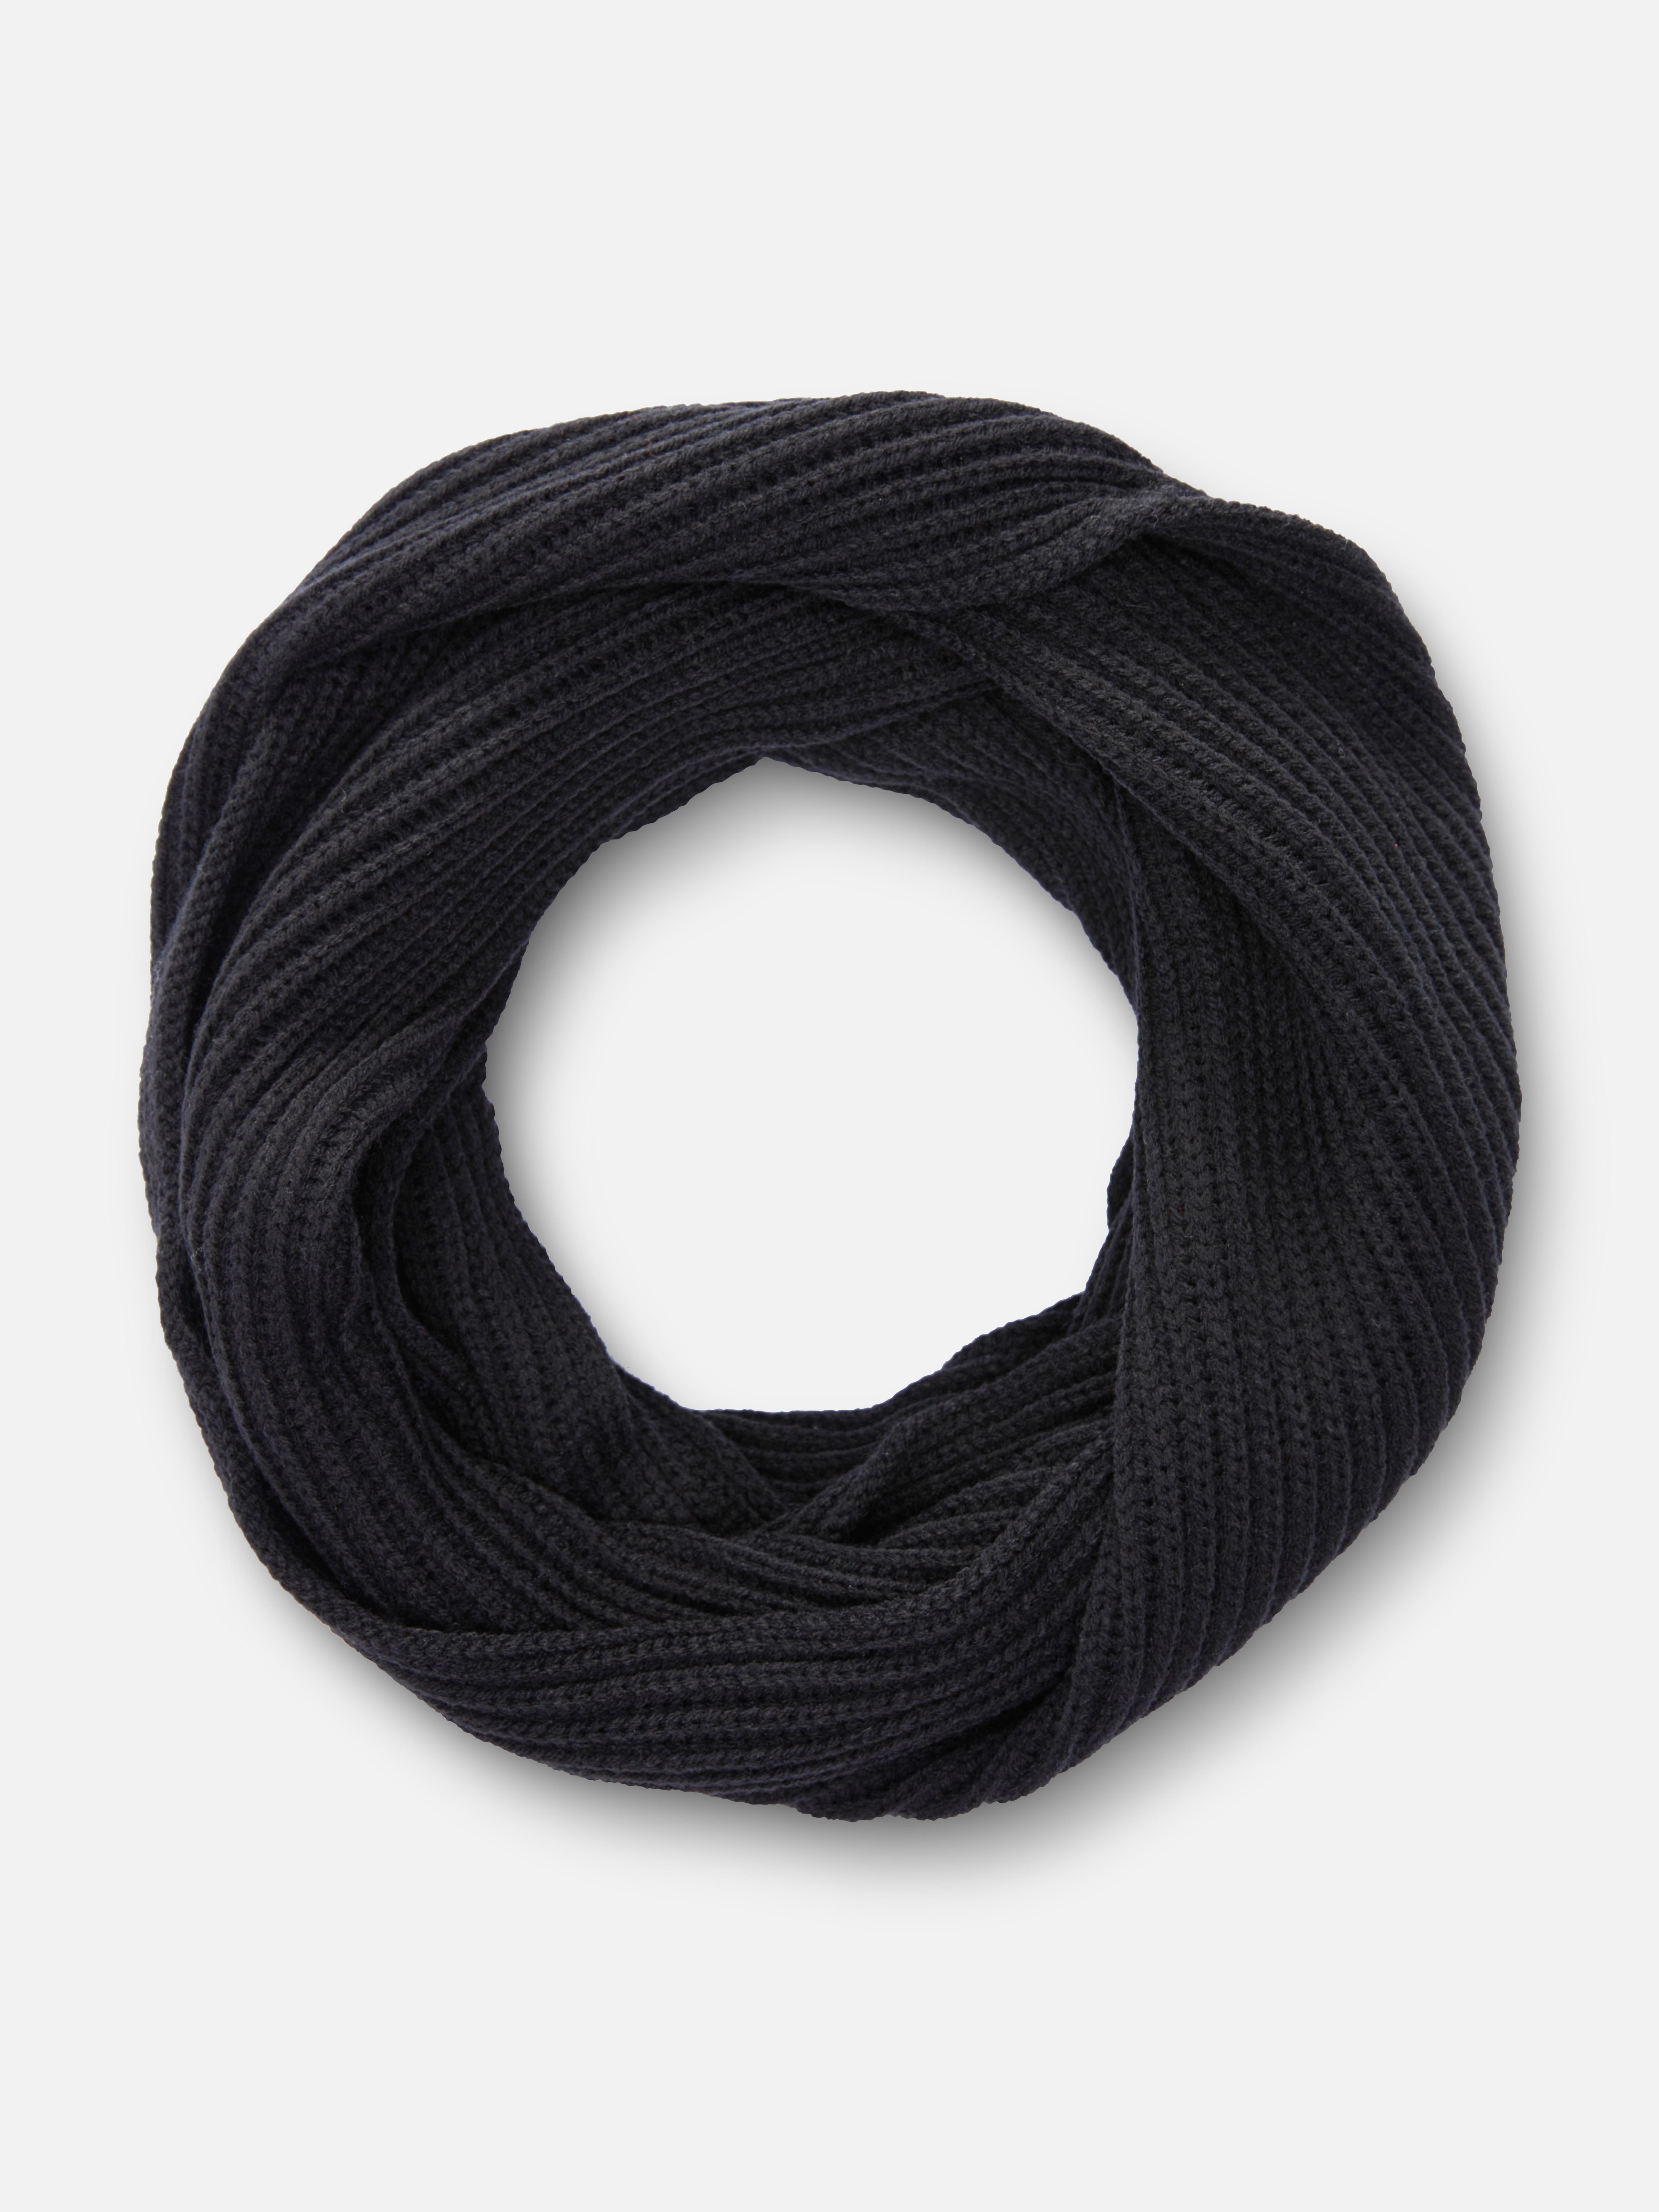 Knitted Snood Scarf Black